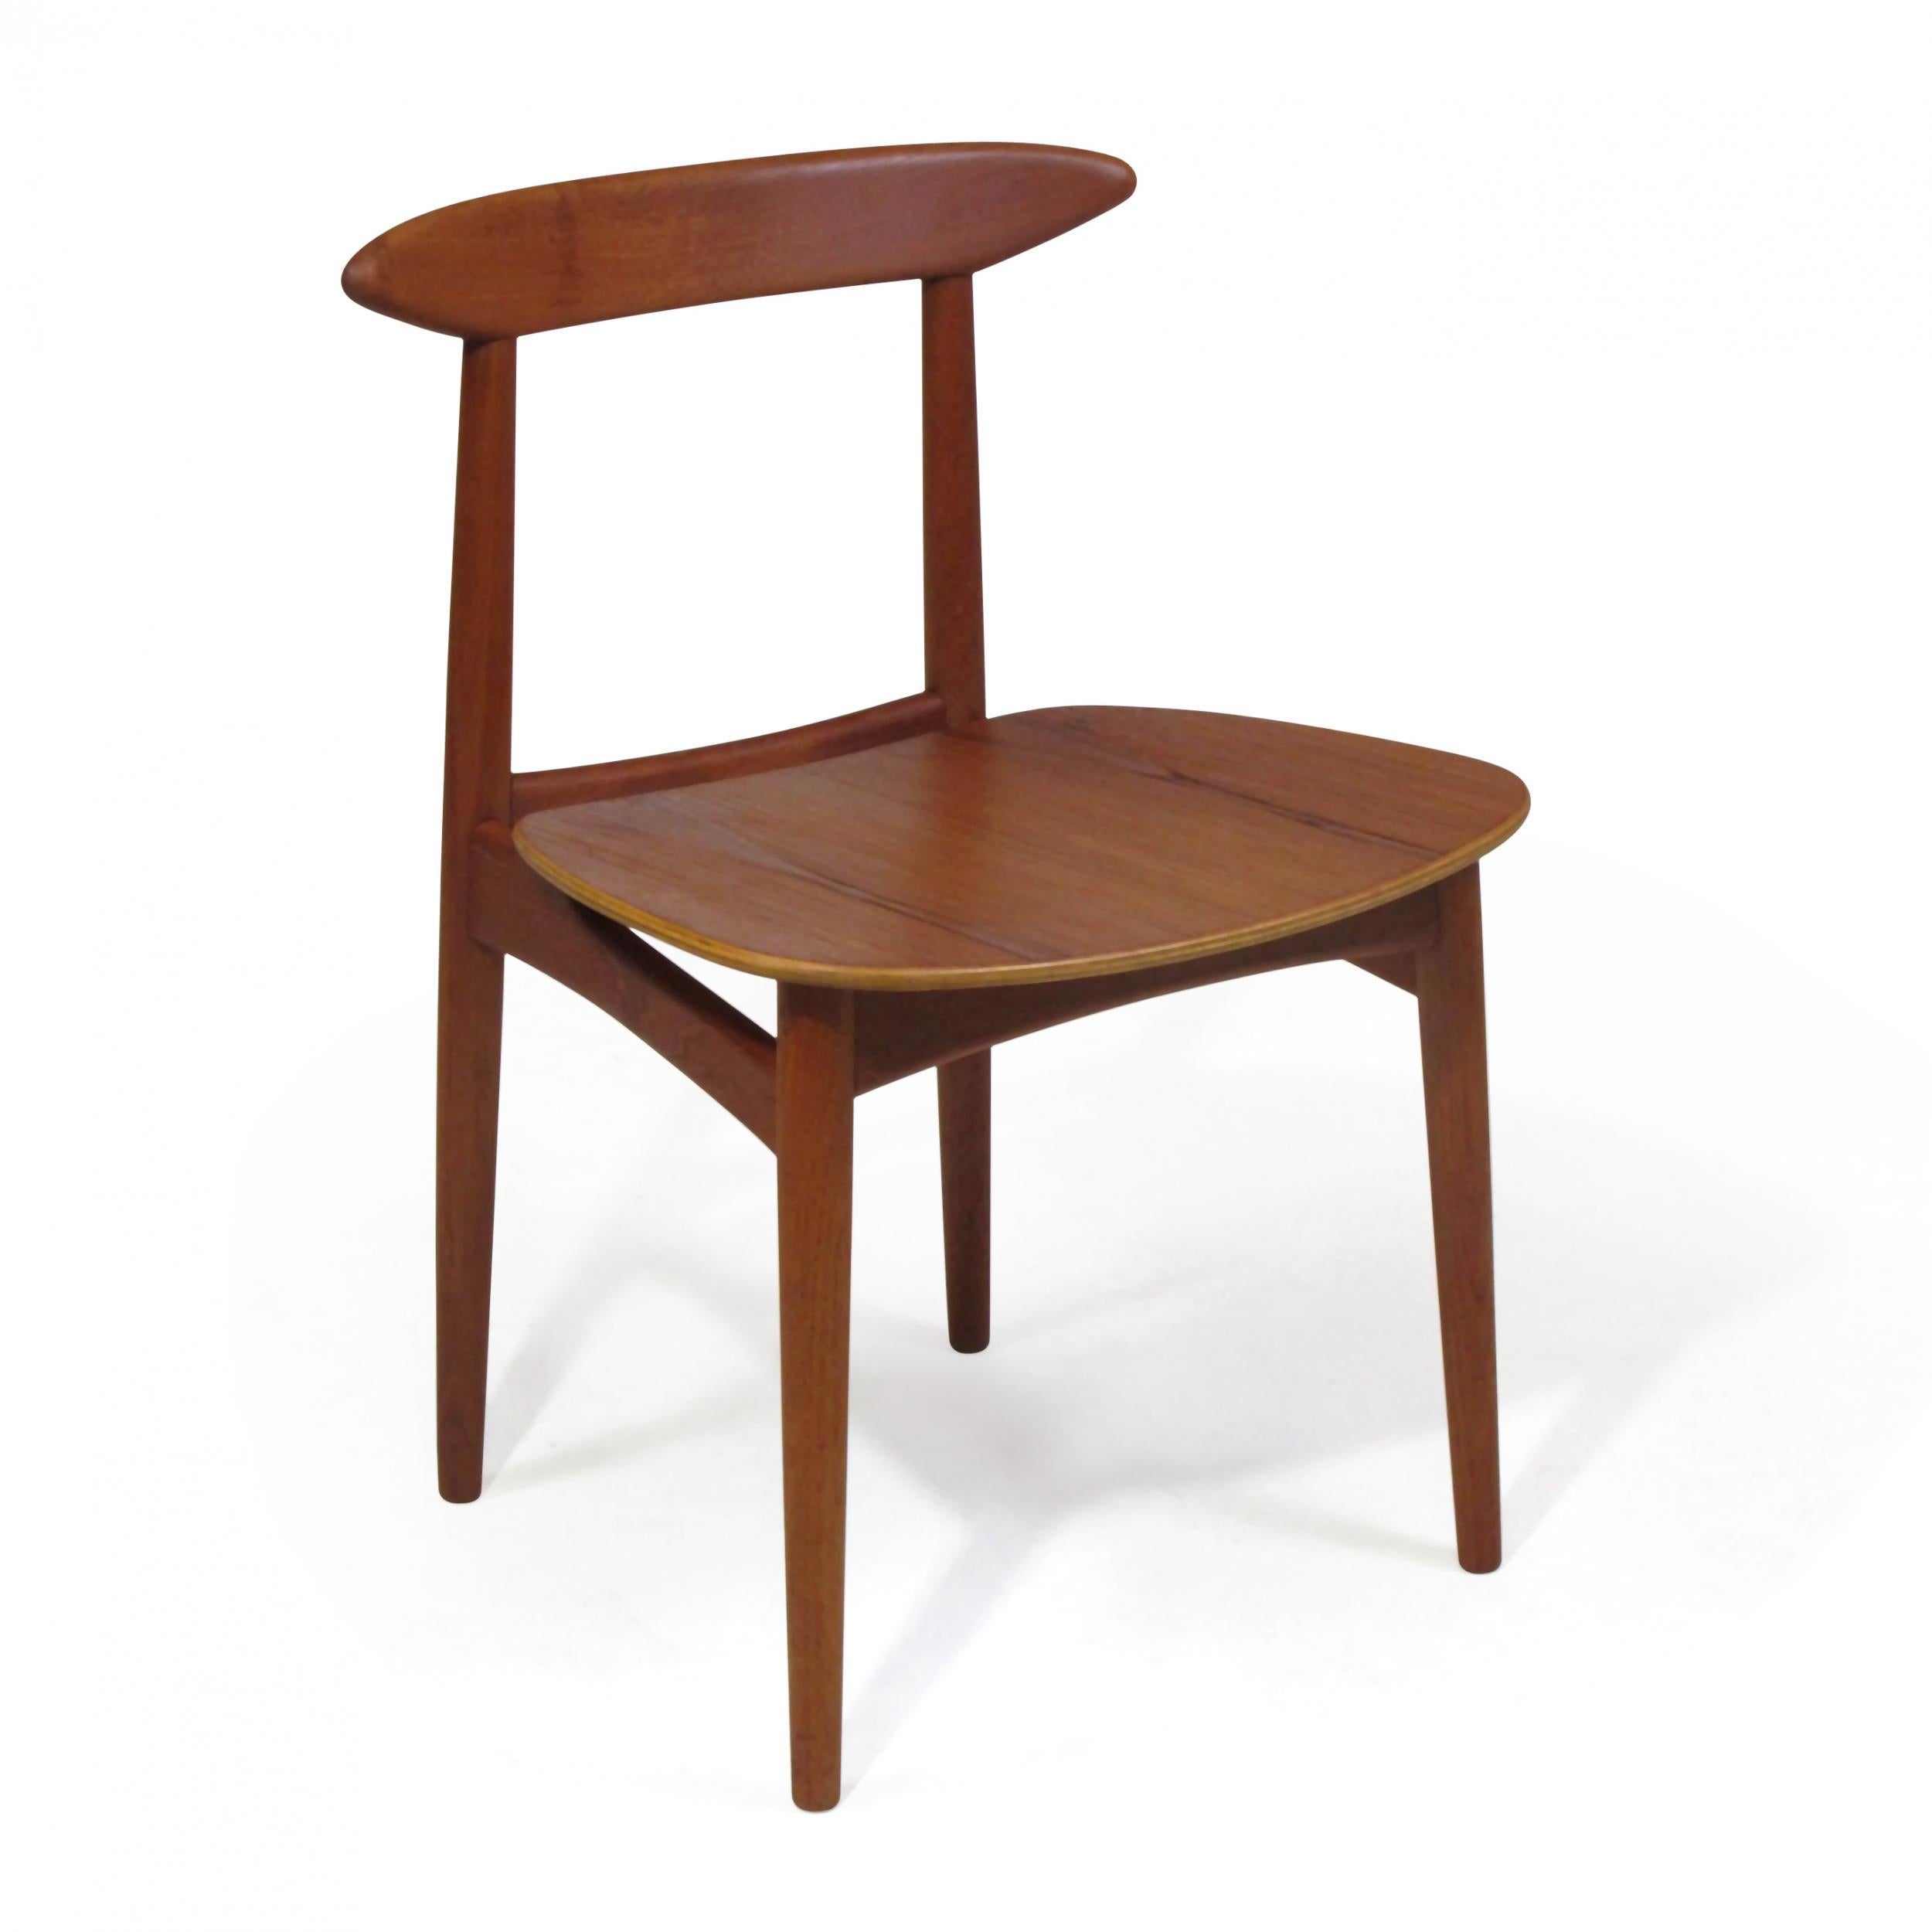 Danish Teak Dining Chairs with Wooden Seats In Excellent Condition For Sale In Oakland, CA